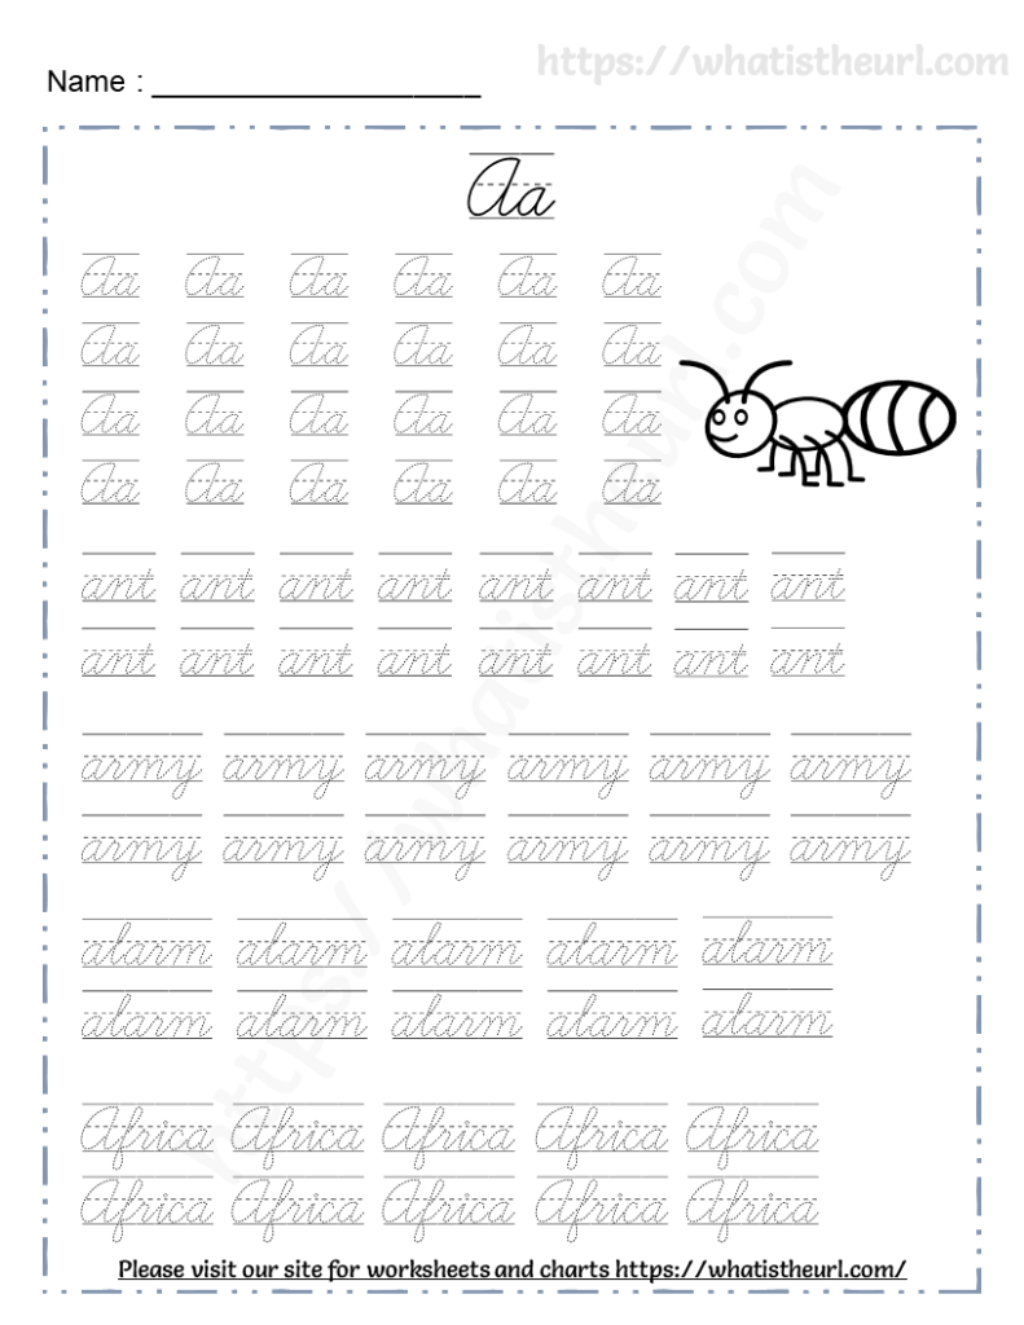 tracing-cursive-letters-worksheets-all-alphabets-your-home-teacher